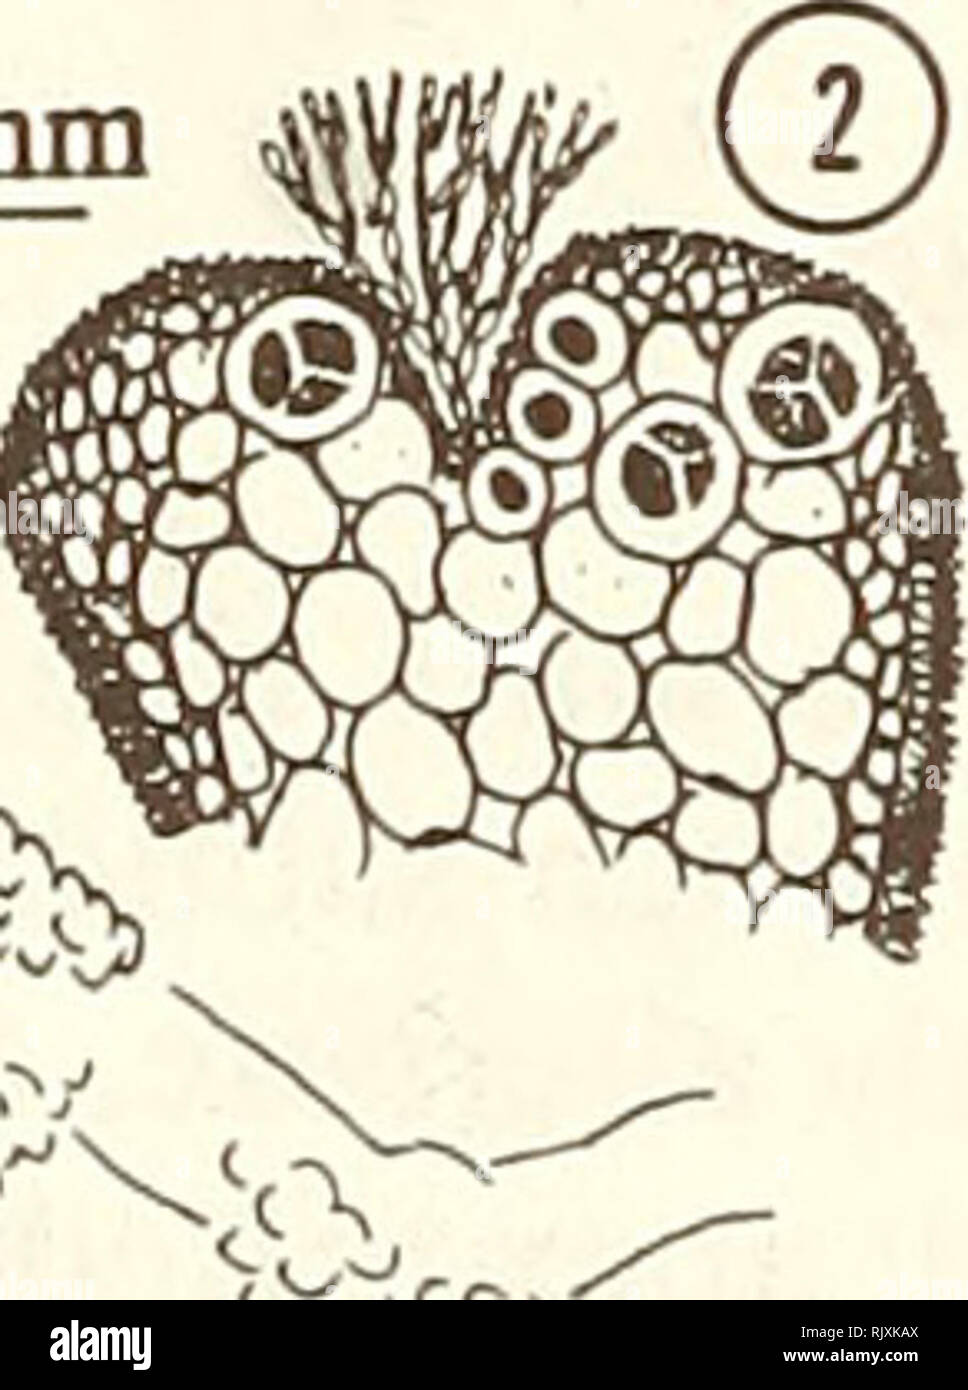 . Atoll research bulletin. Coral reefs and islands; Marine biology; Marine sciences. 200 fan 100 ^m 1. Habit of plant. 2. Branchlet apex with tufted filaments arising from terminal depression. 3. Immature surface cells. 4. Elongated mature surface cells. 5. Cross section of main axis. Laurencia implicata J. Agardh 1852 [1852-1863]: 745. Conspecific with Laurencia intricata Lamouroux 1813: 131, plate 9 (figures 8 and 9) - see Silva et al. 1987:66. Thallus fleshy, gregarious, in loose mats or solitary; 5-10(-25) cm tall; yellow-green, stubby branchlets often rose; branching sparse, irregularly a Stock Photo